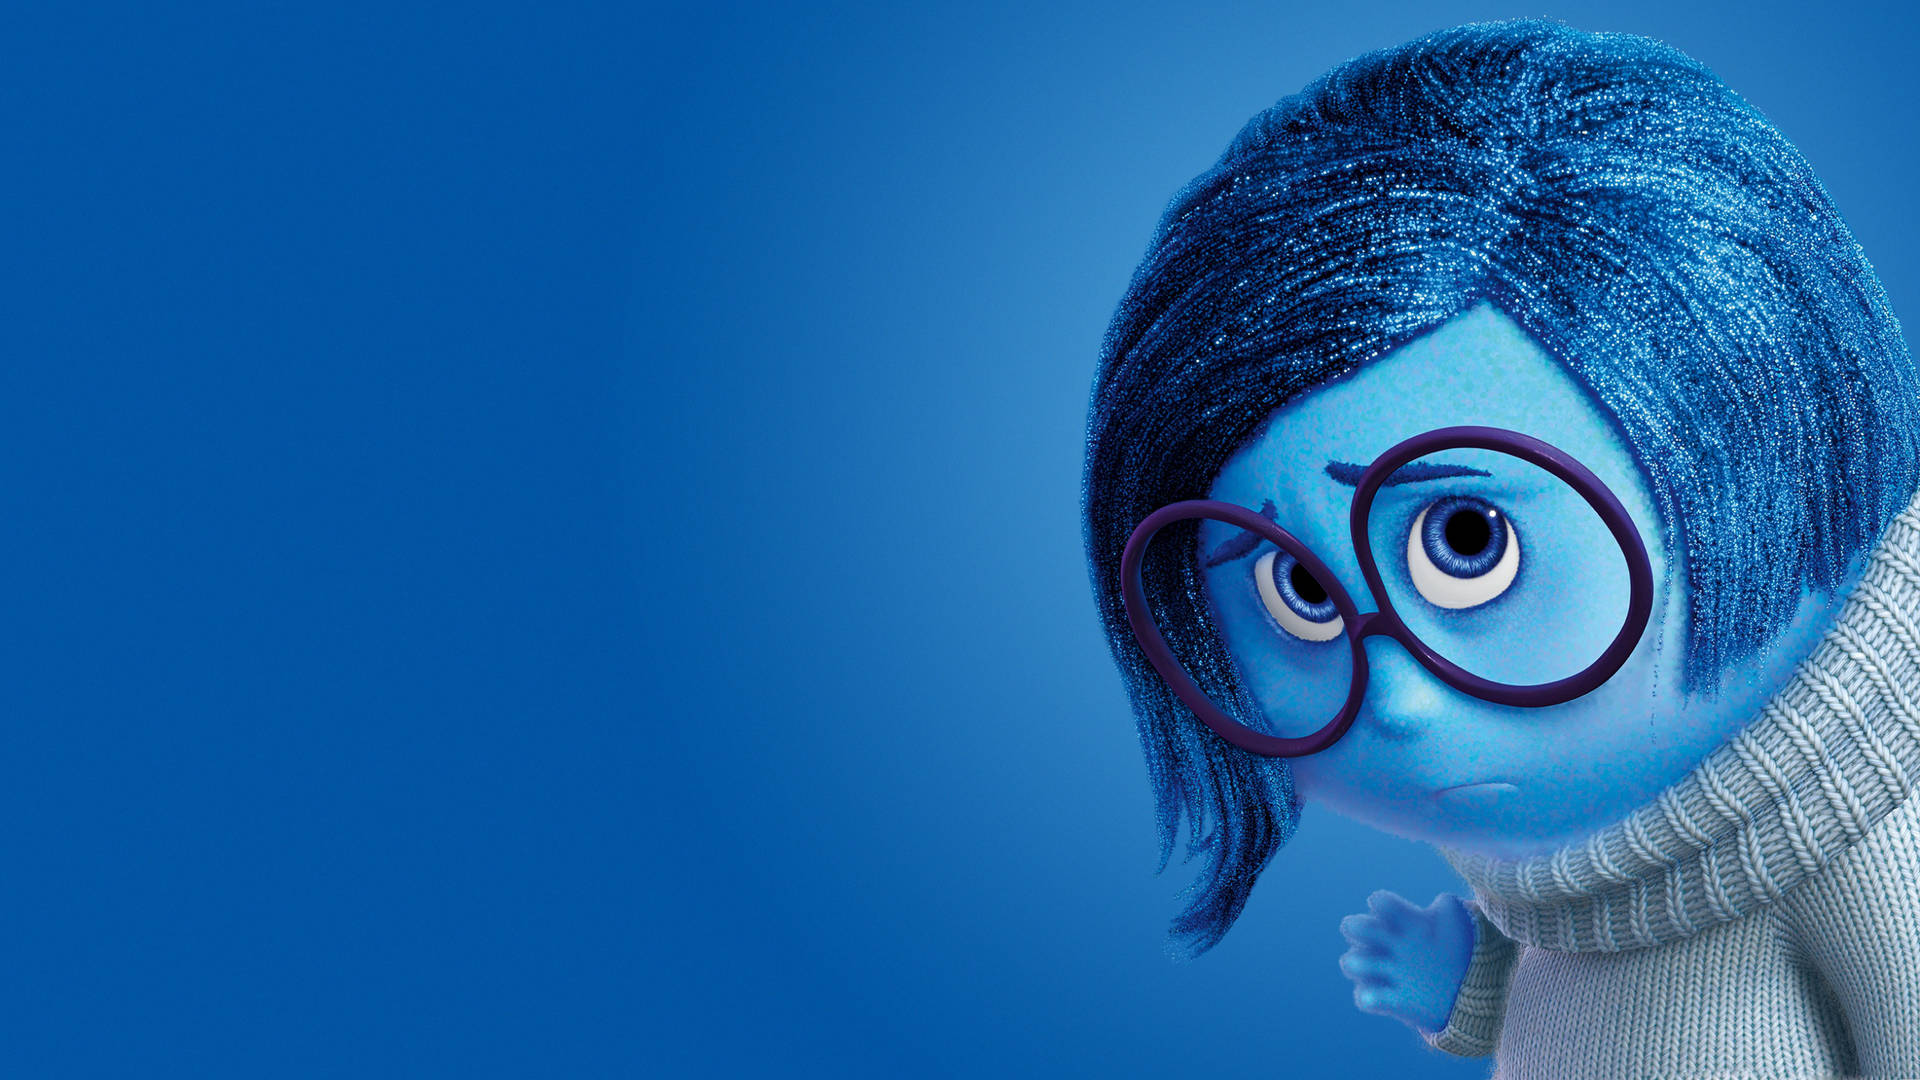 Sadness Inside Out Blue Poster Background